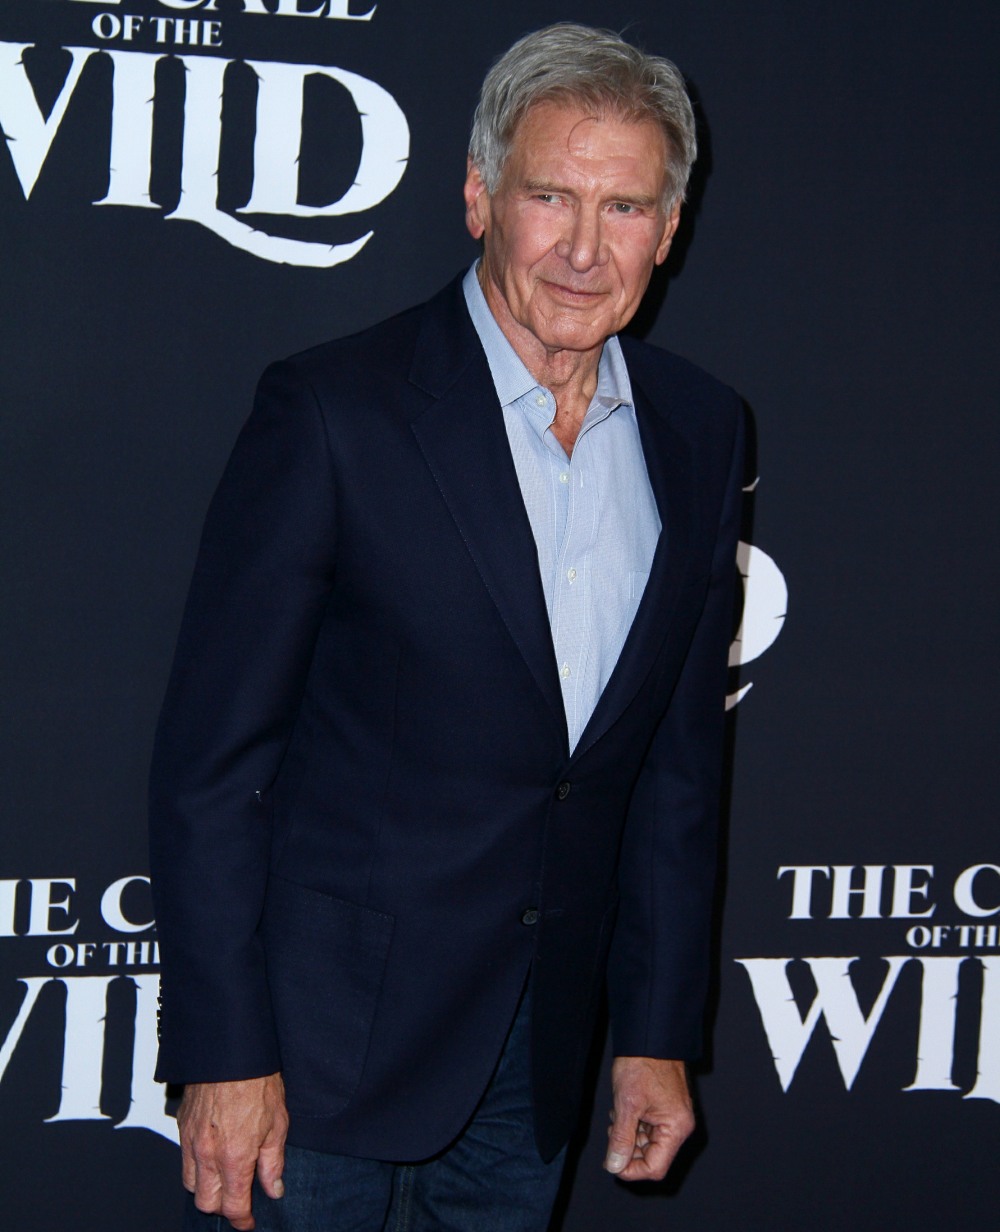 Harrison Ford attendsThe premiere of "The Call Of The Wild" in Los Angeles